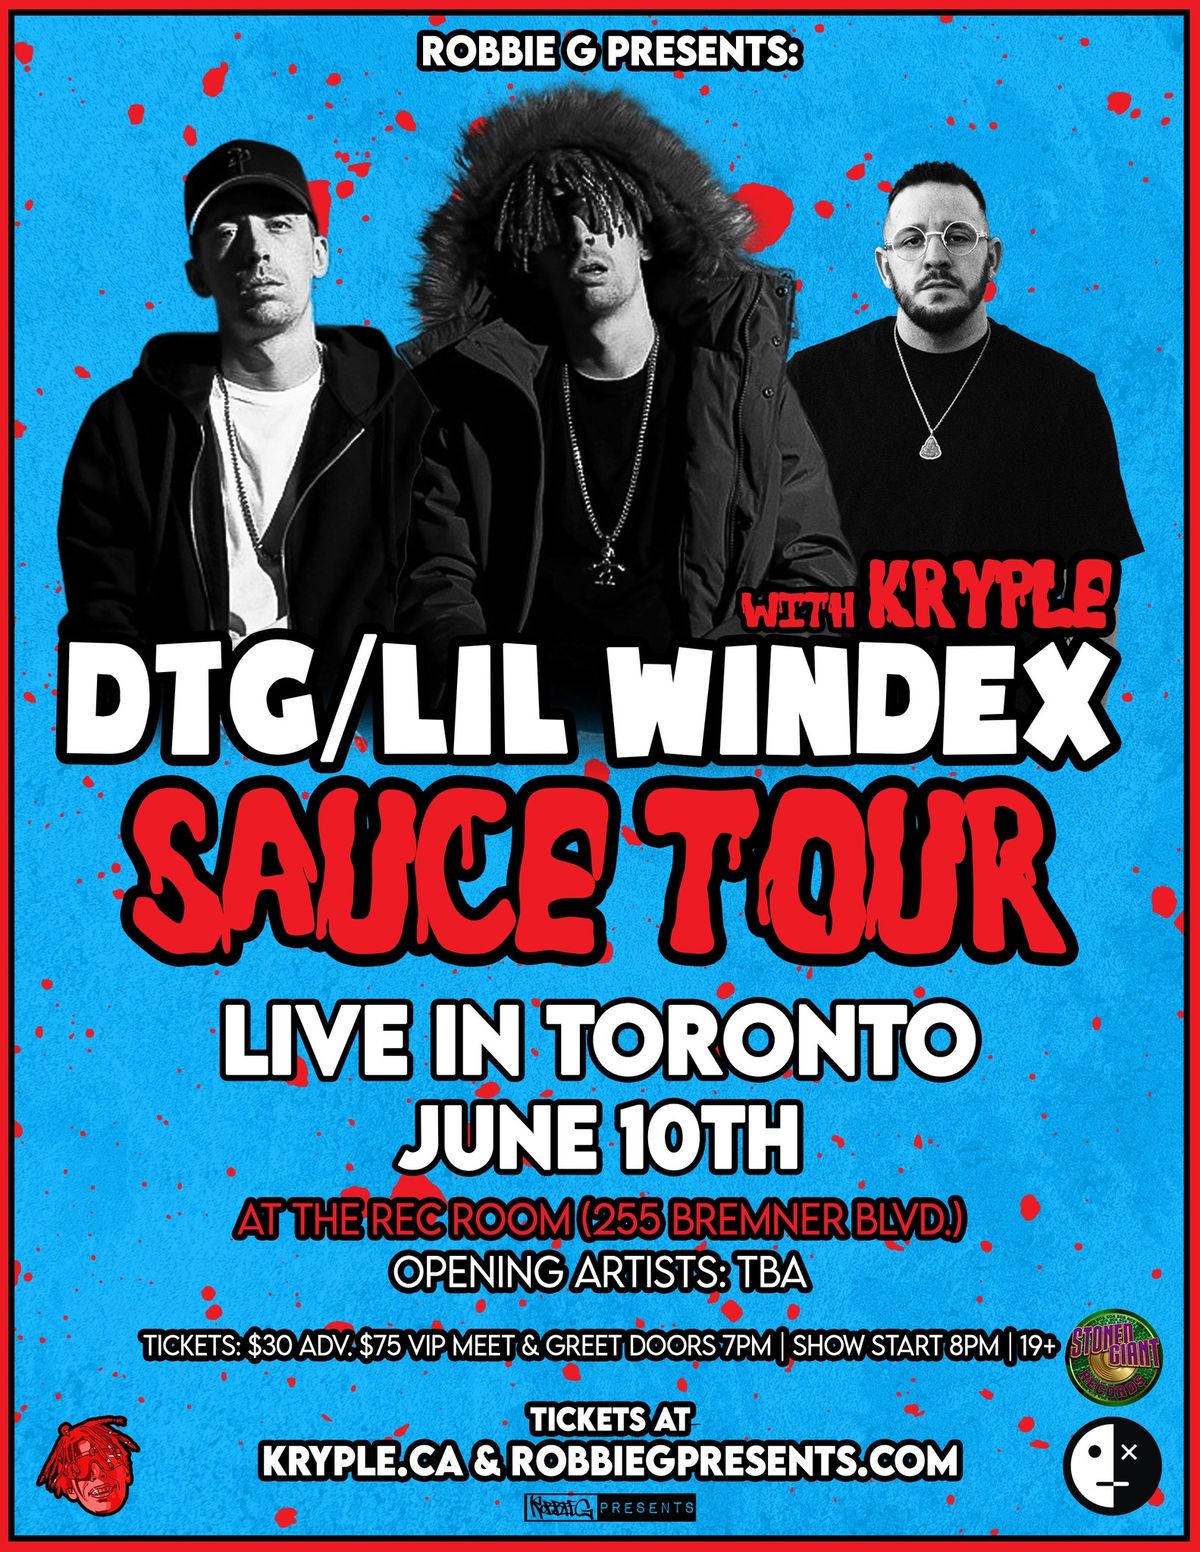 DTG\/Lil Windex in Toronto June 10th at The Rec Room with Kryple